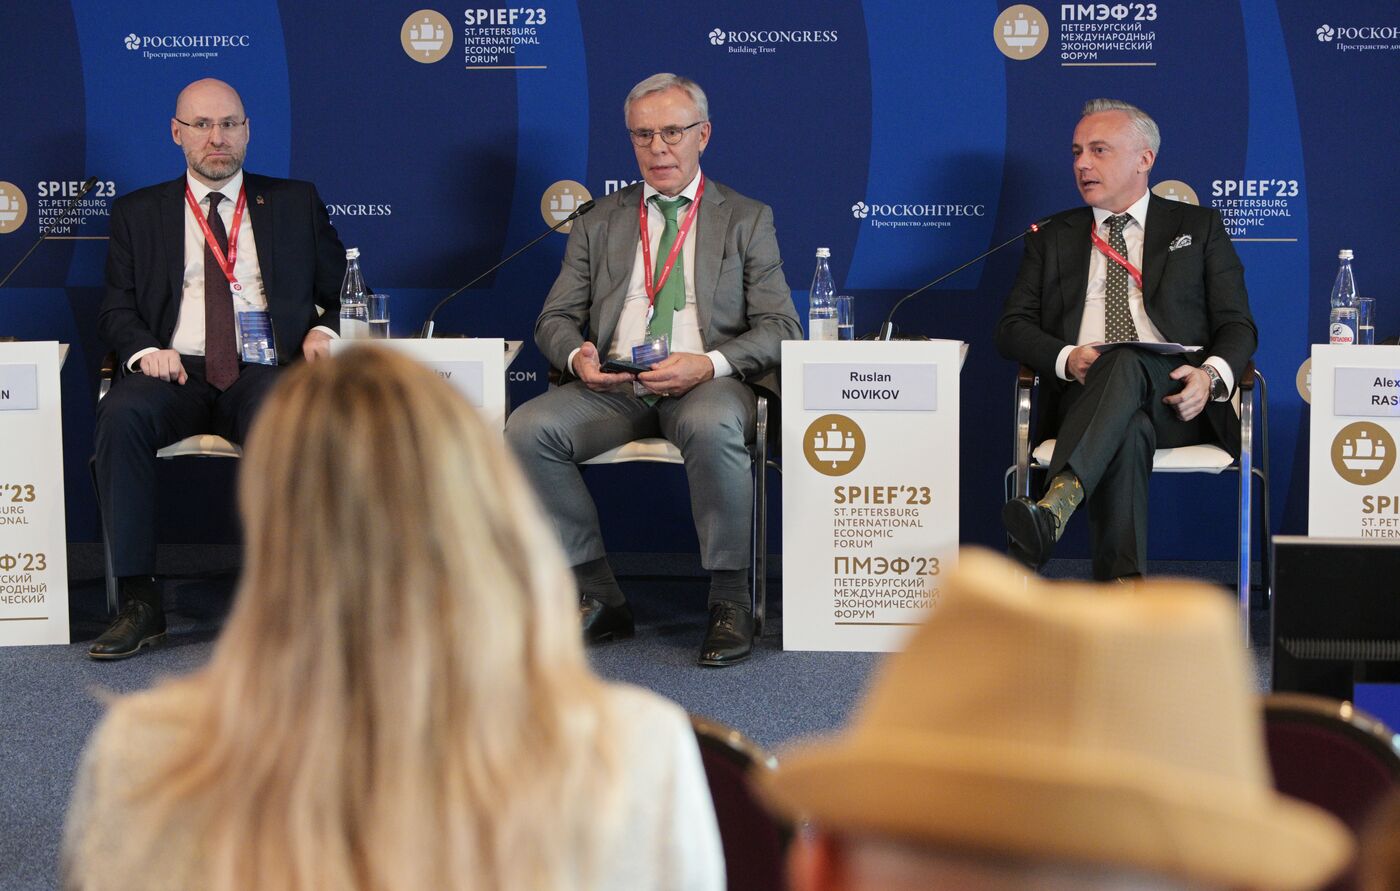 SPIEF-2023. 300 Years of Experience: What's Next for Russia's Scientific Institutions?